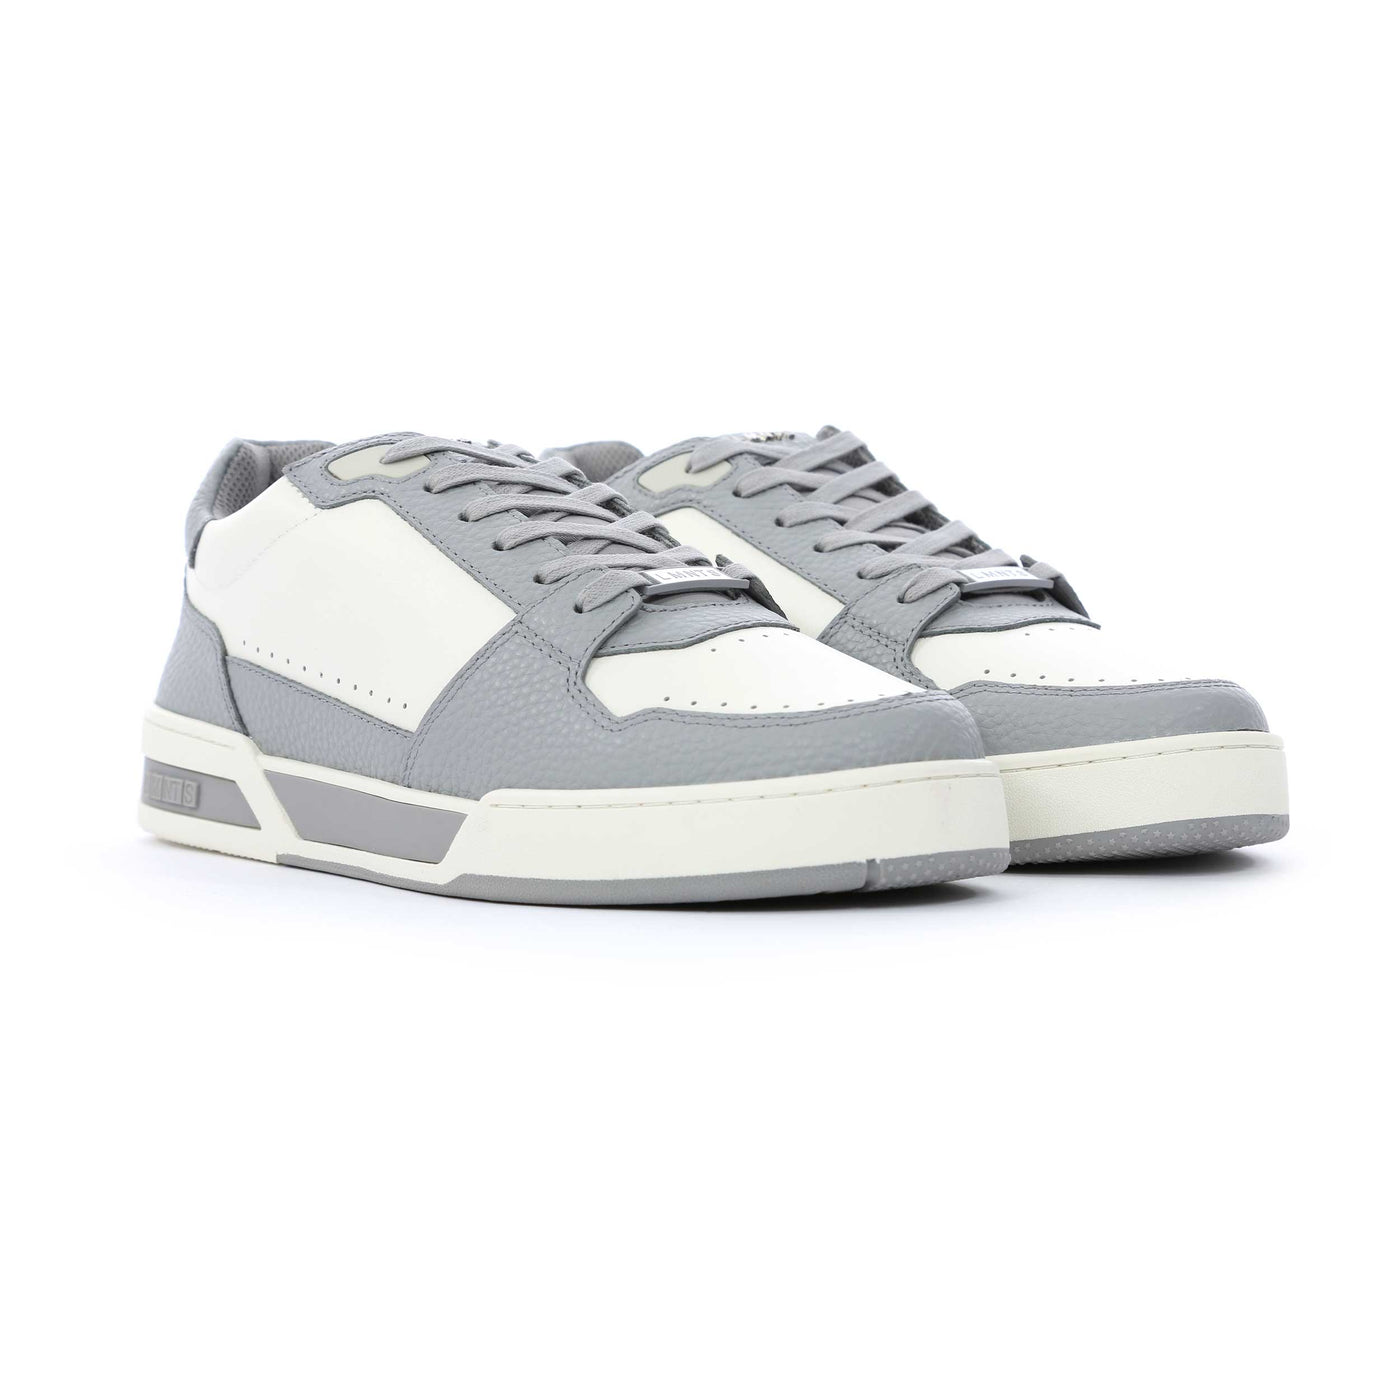 LMNTS Porter Tumbled Trainer in Grey & White Pair